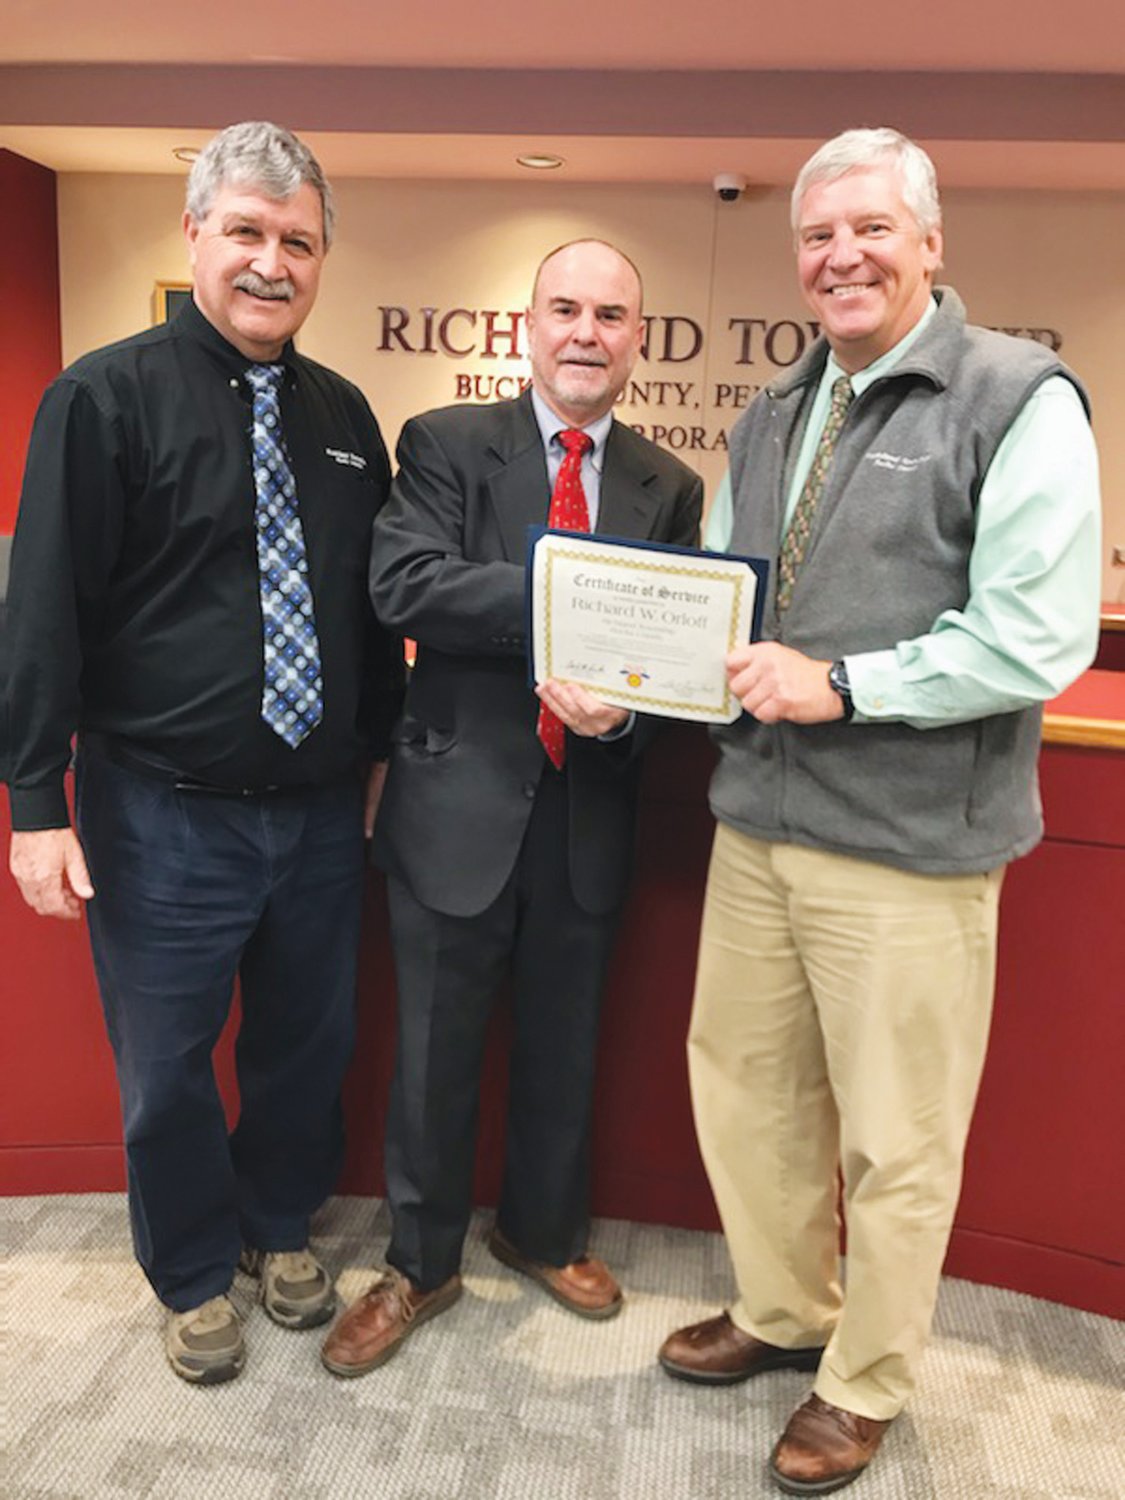 Richland Township Supervisor Rick Orloff received a certificate of appreciation from the Pennsylvania State Association of Township Supervisors (PSATS) honoring his 24 years of service as a supervisor. From left are xxxx Botson, Orloff and Paul Sepanoff at the Dec. 9 public supervisors meeting. Orloff did not seek reelection for a fifth term. Photograph by Cliff Lebowitz.